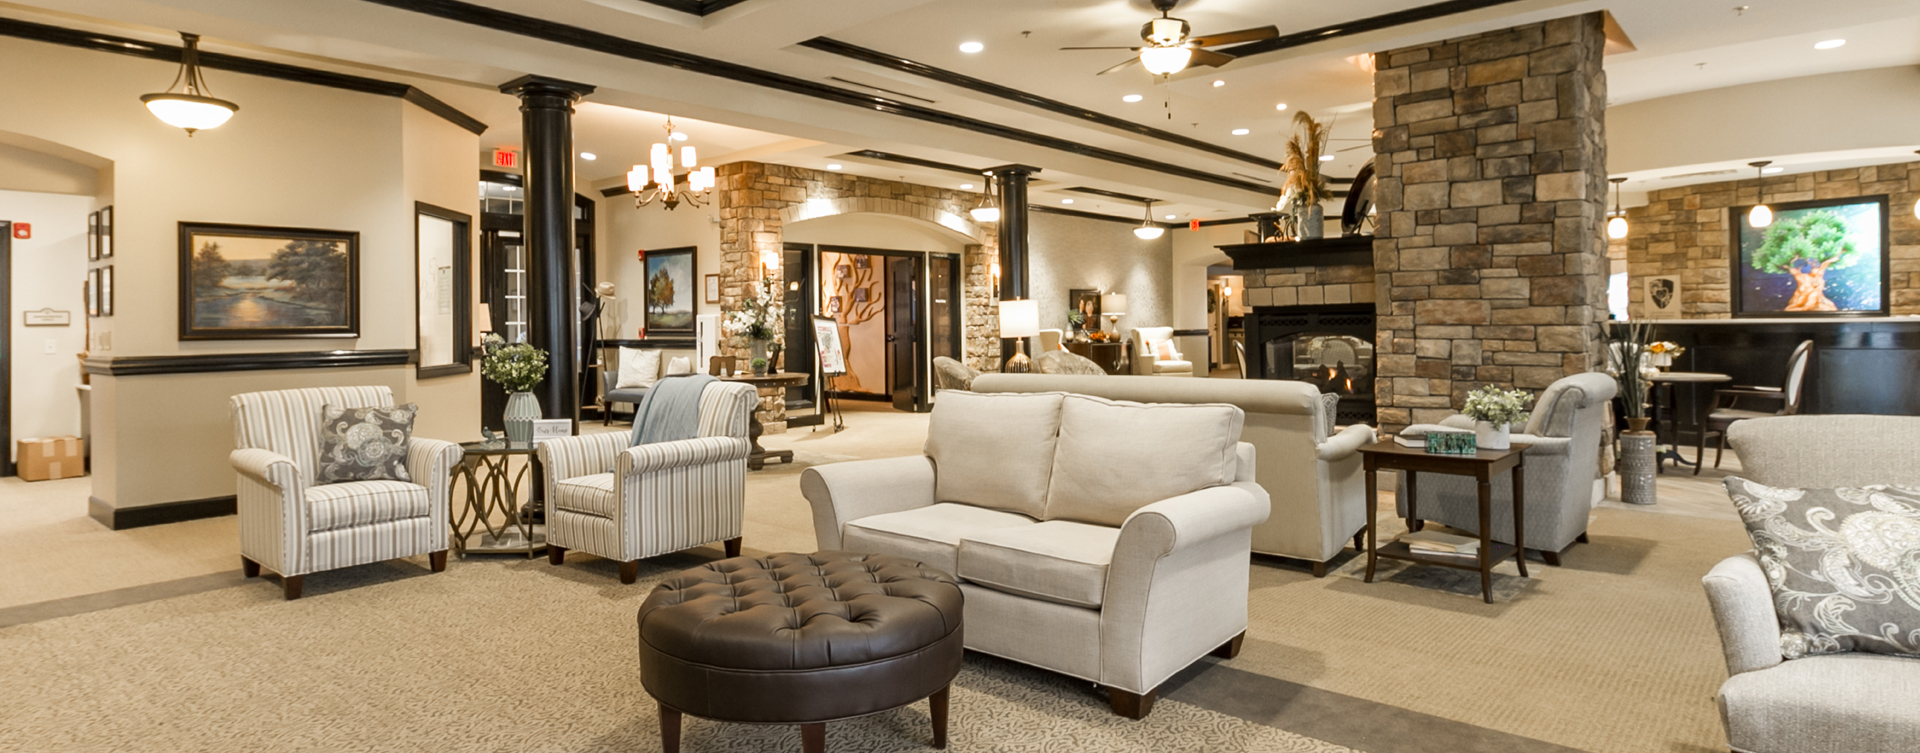 Socialize with friends in the living room at Bickford of Virginia Beach